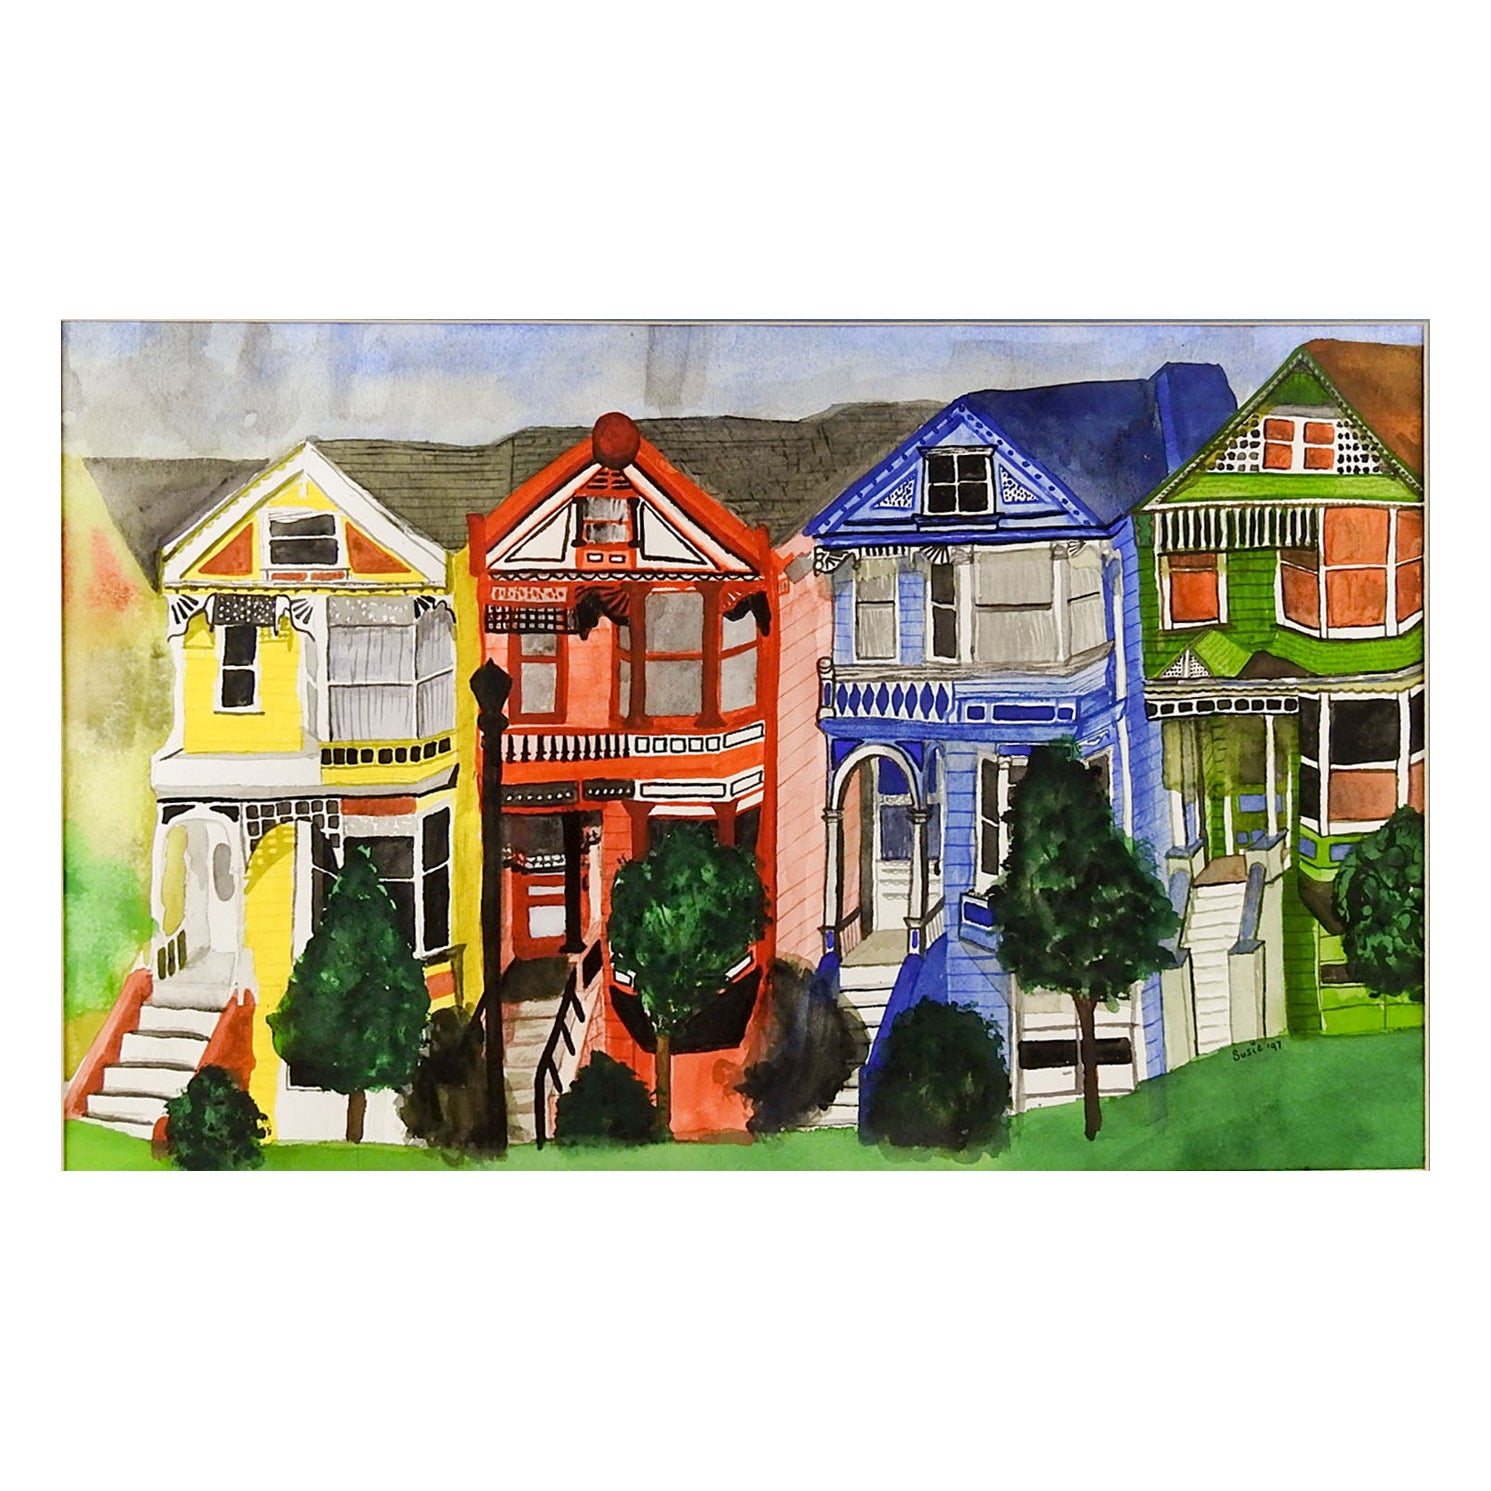 1990s San Francisco Painted Ladies Watercolor Painting For Sale